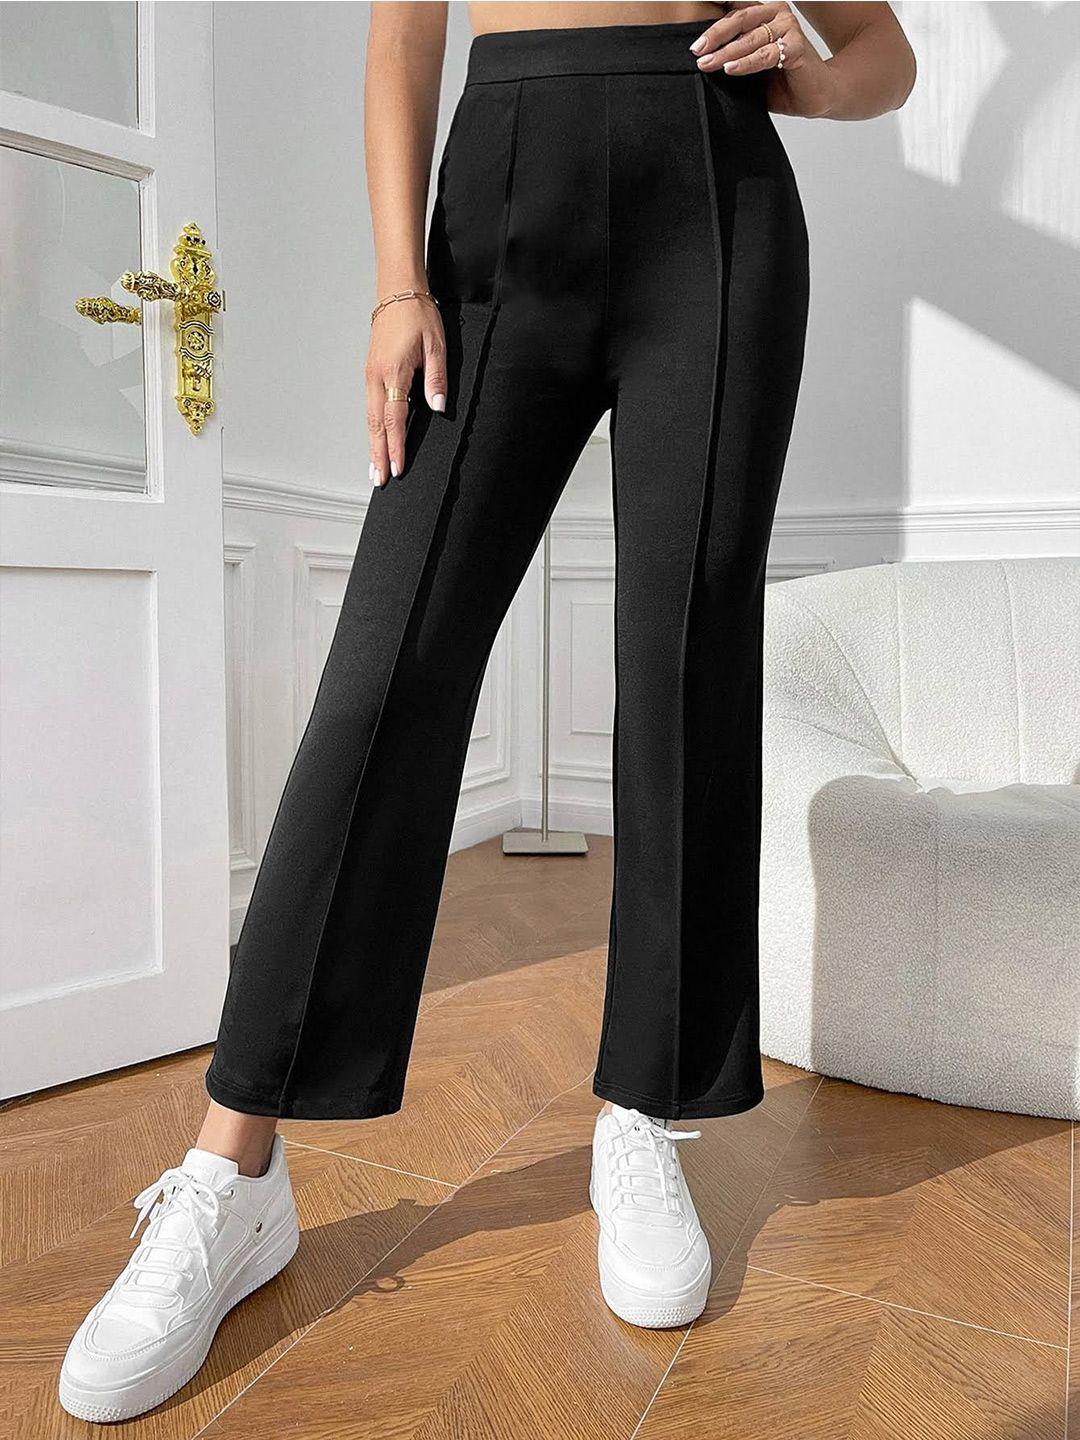 visit-wear-women-high-rise-pleated-bootcut-trousers